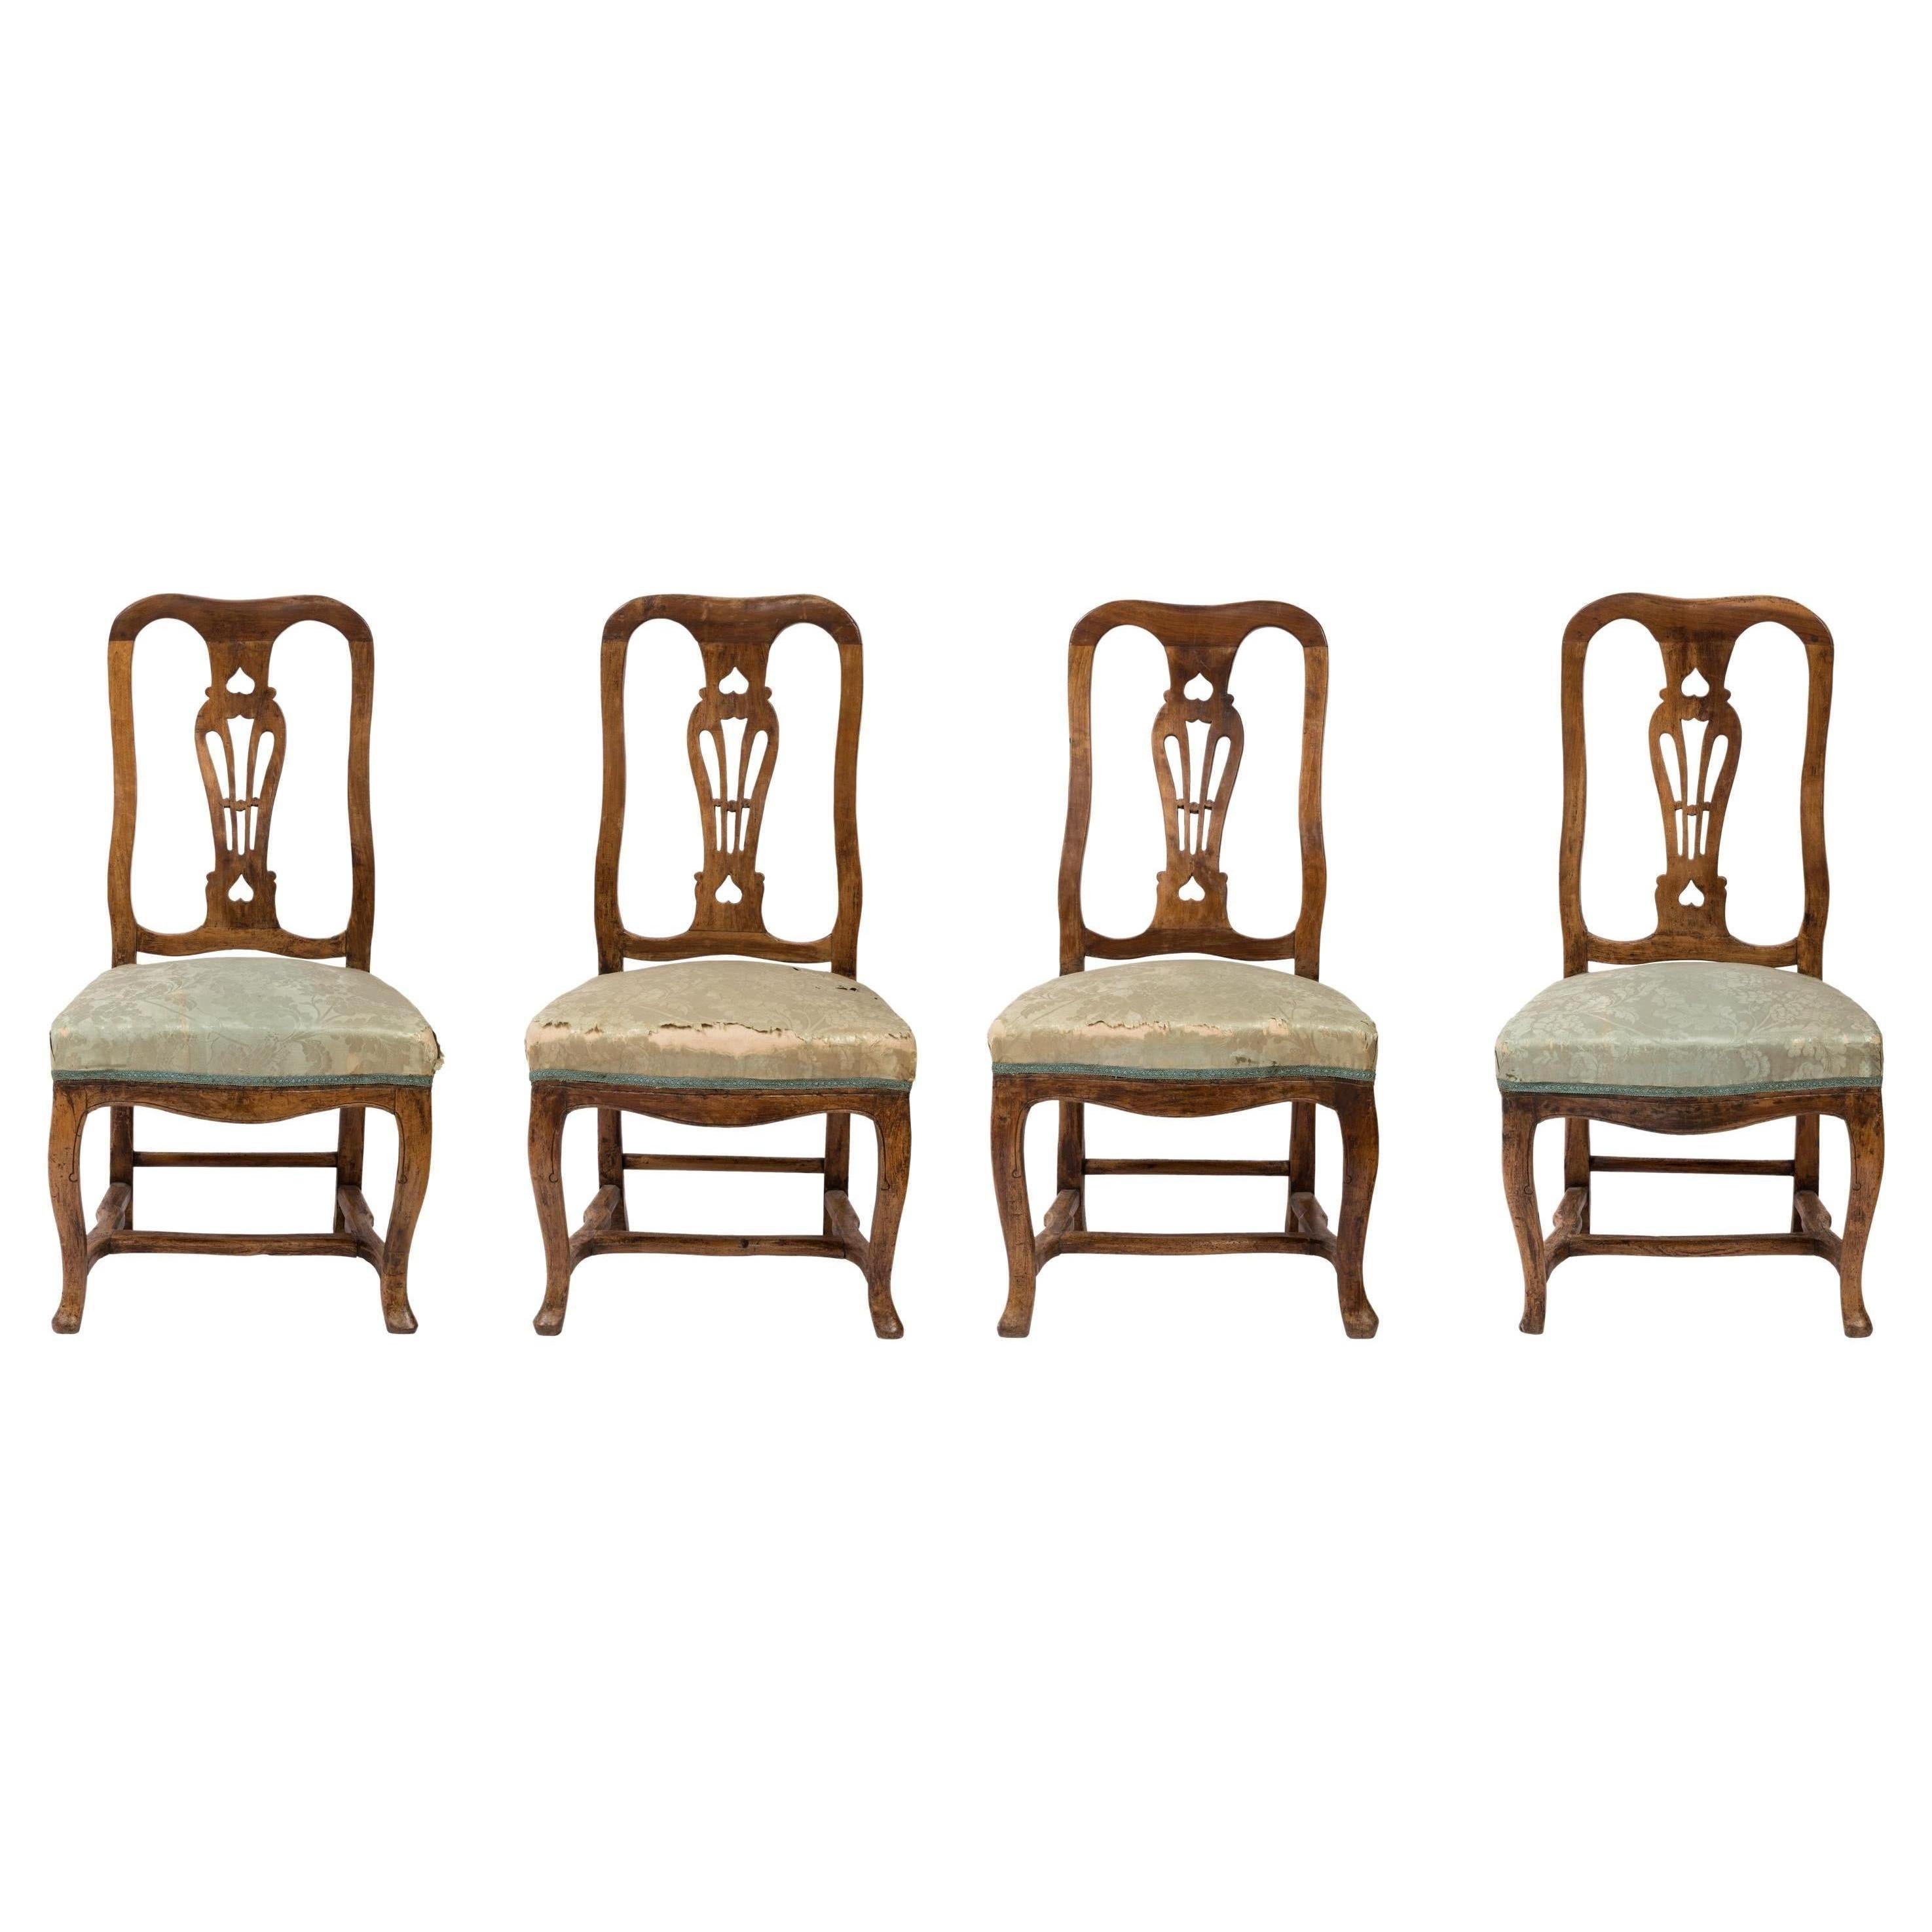 Set of 4 Antique Queen Anne Side Chairs, Hand-Carved Wood, Original Silk Fabric For Sale